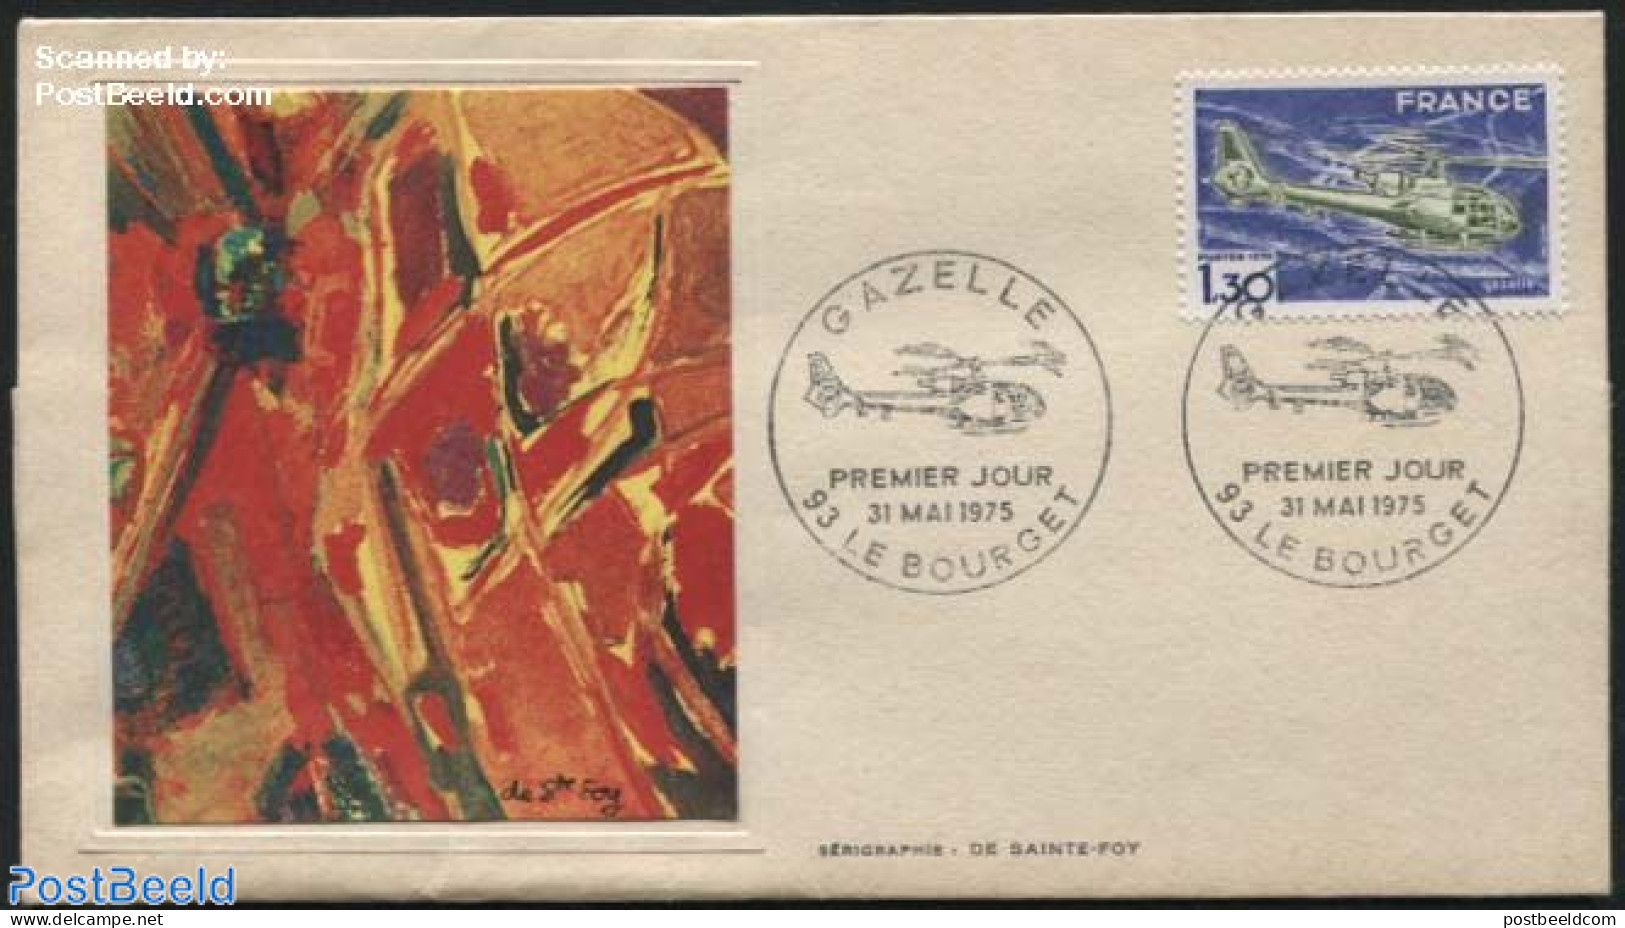 France 1975 Art Cover, Helicopter - Sainte-Foy, First Day Cover, Transport - Helicopters - Covers & Documents